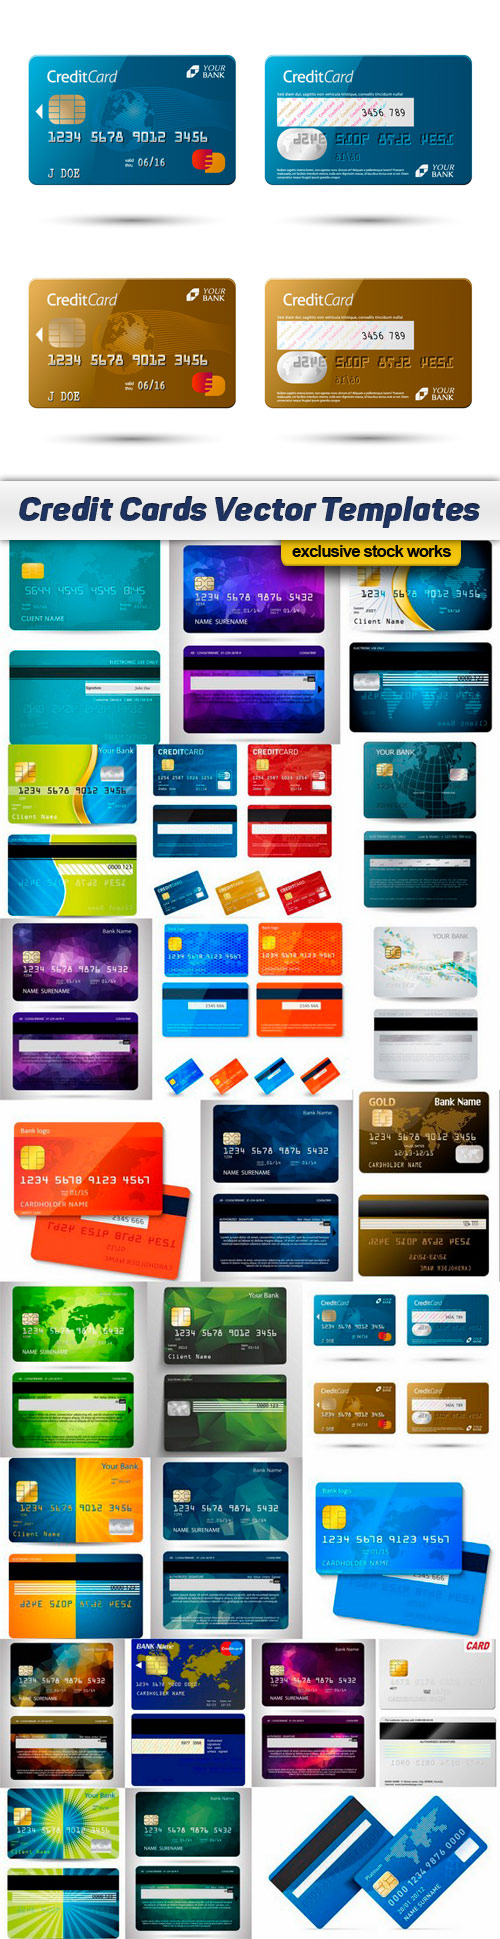 Credit Cards Vector Templates 4